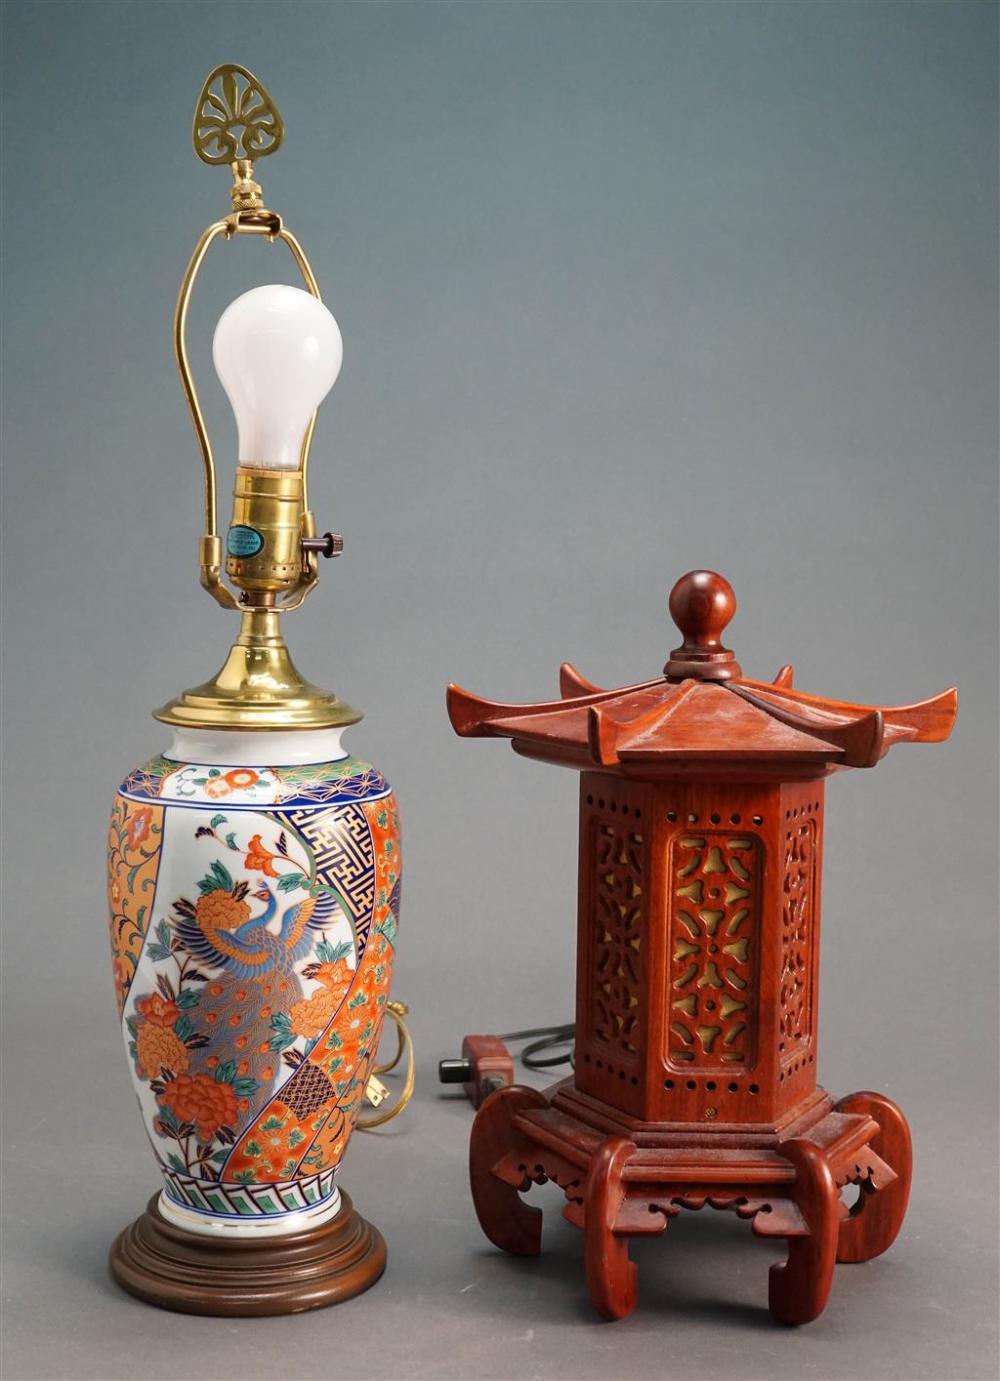 TWO ASIAN STYLE LAMPS, H OF TALLER: